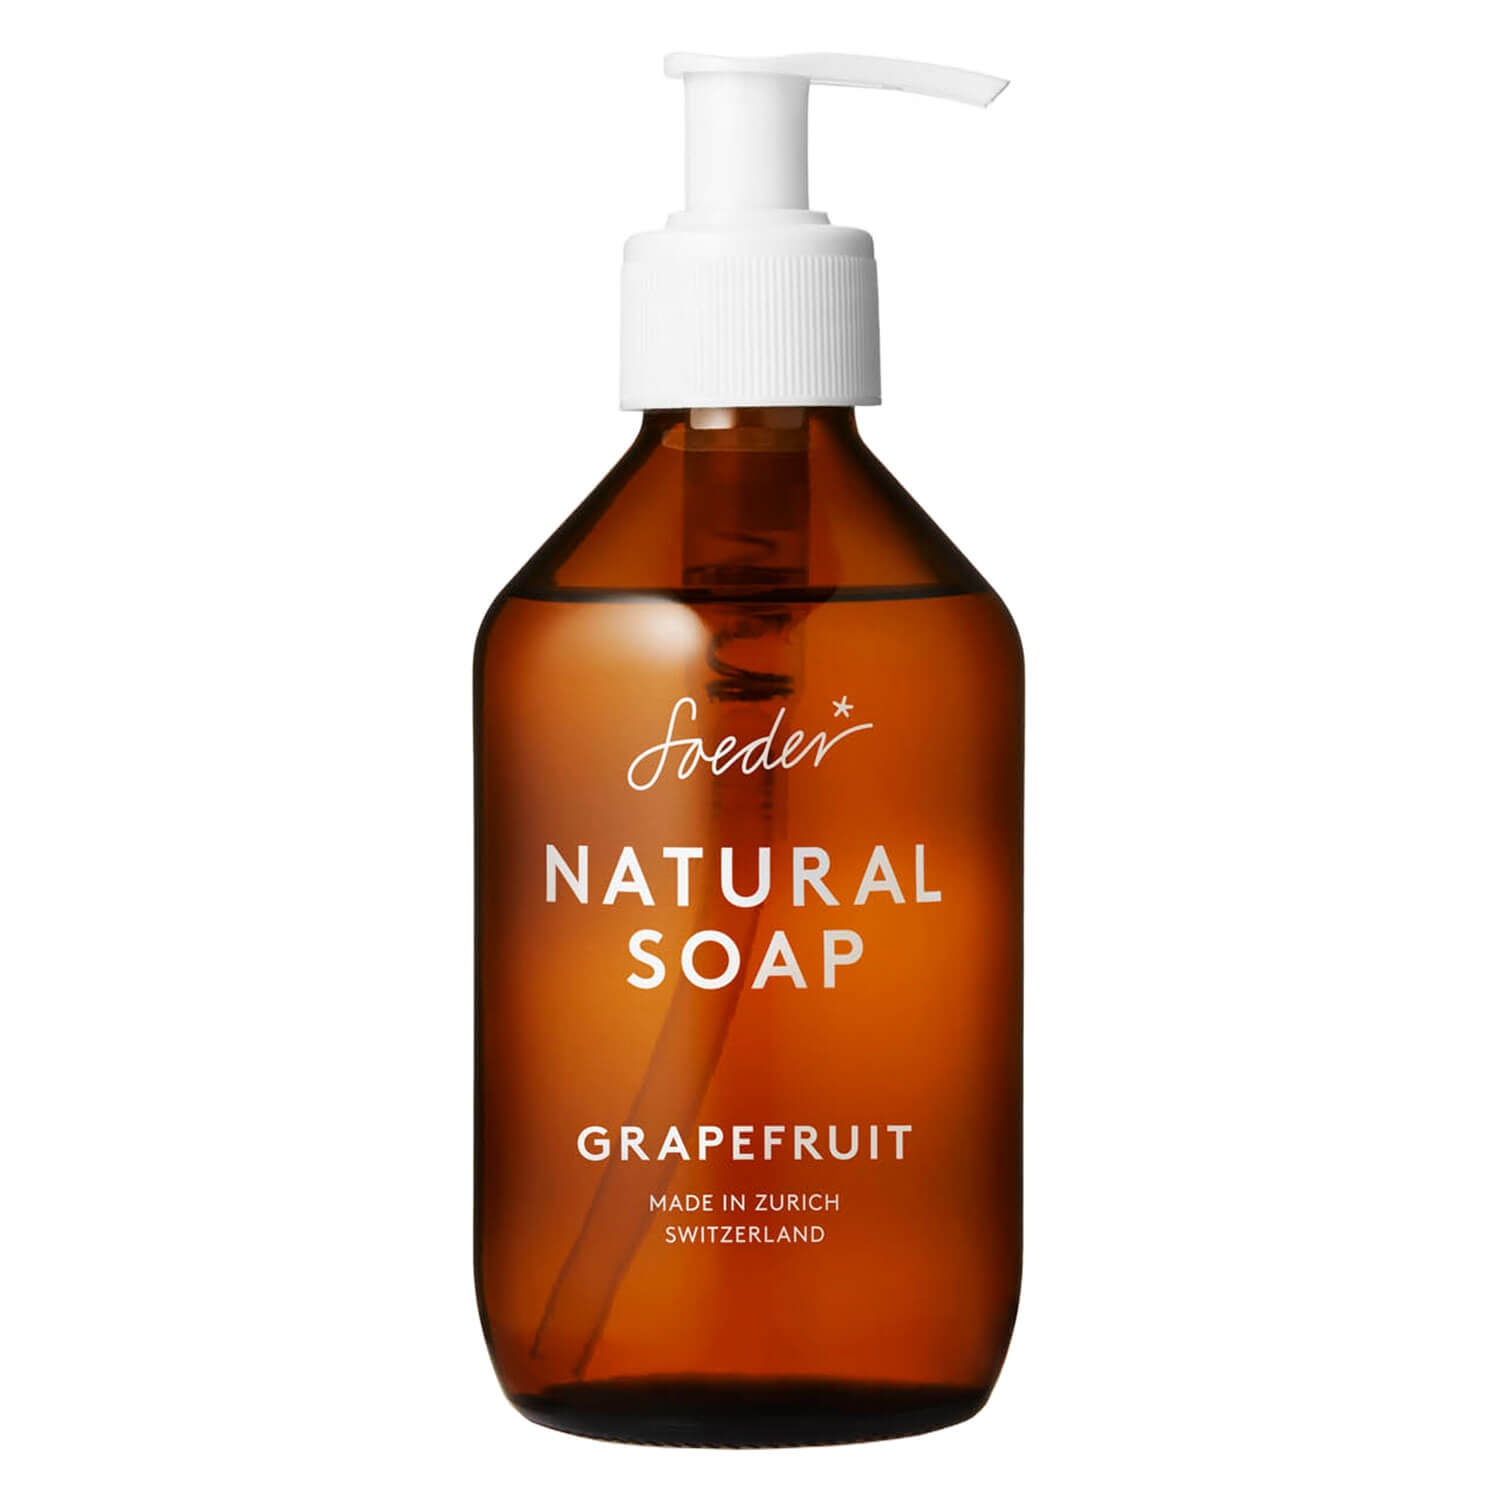 Product image from Soeder - Natural Soap Grapefruit